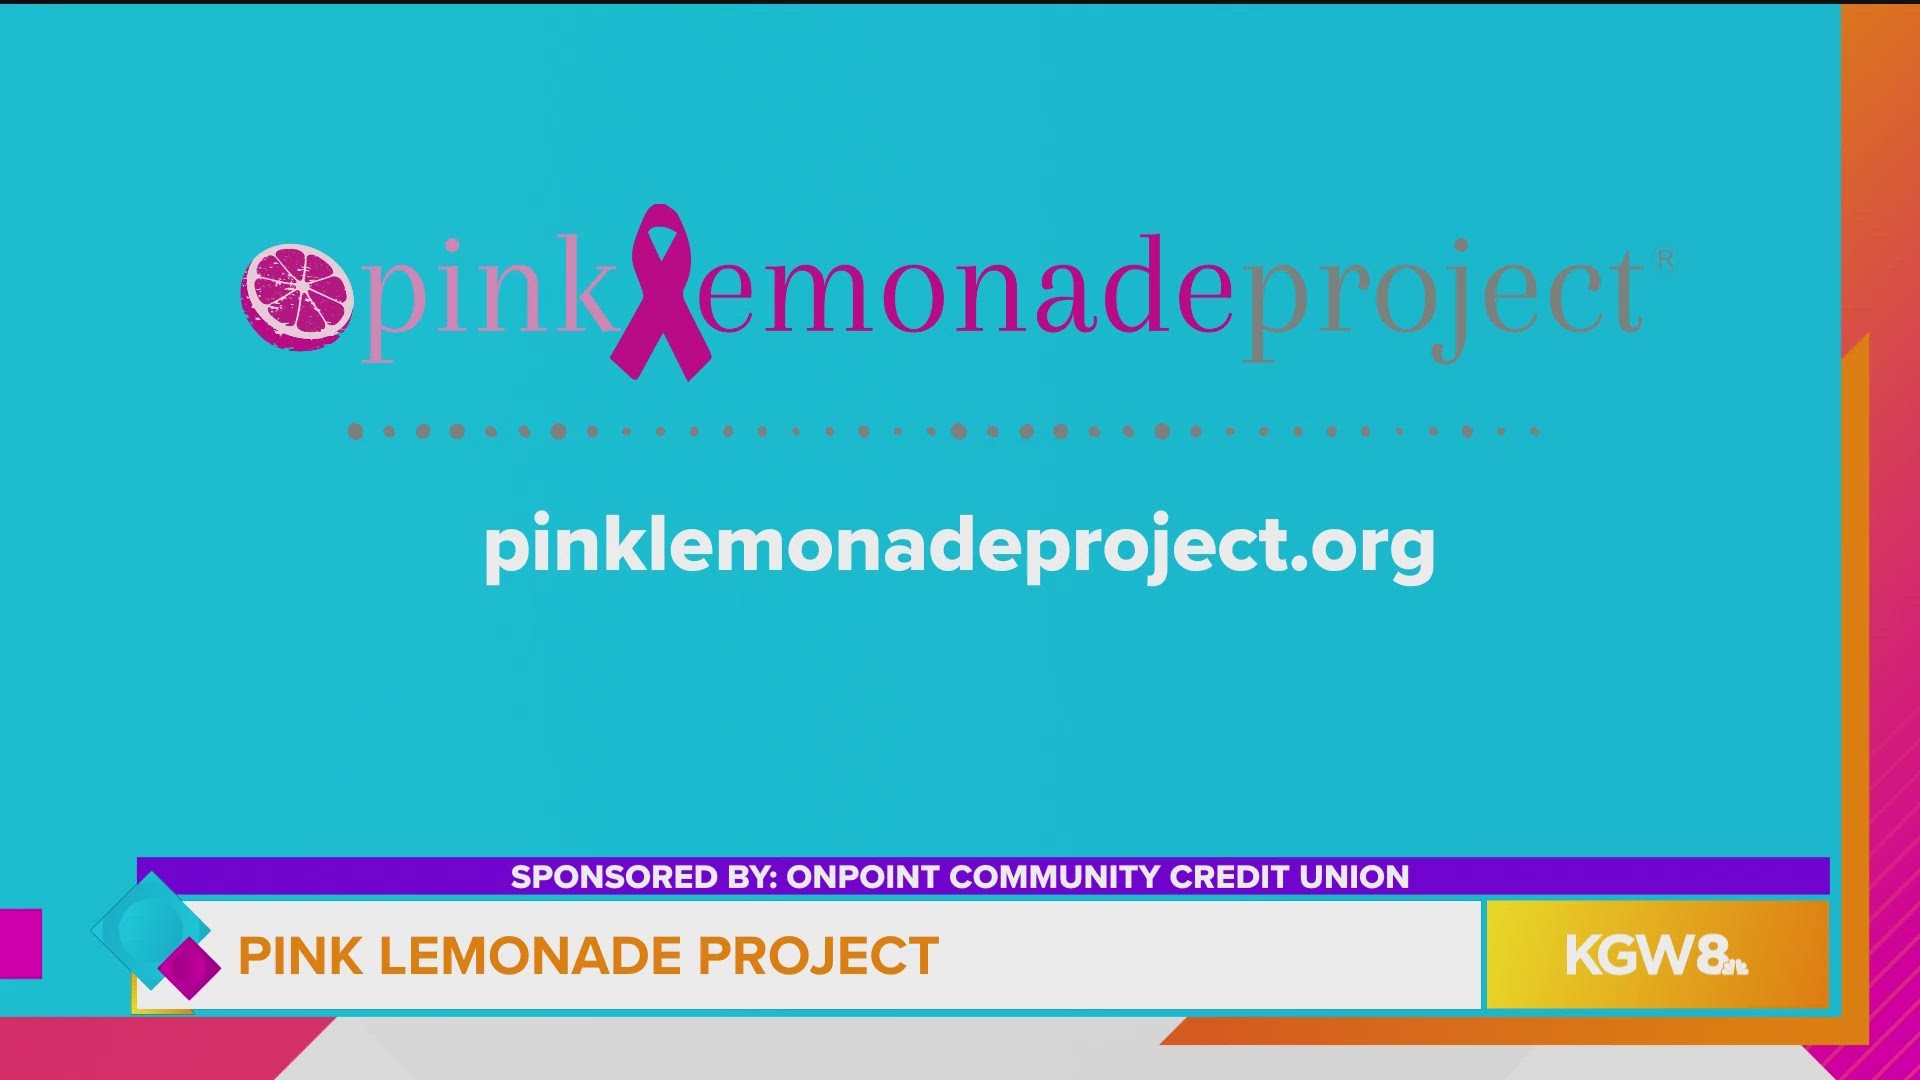 This segment is sponsored by OnPoint Community Credit Union